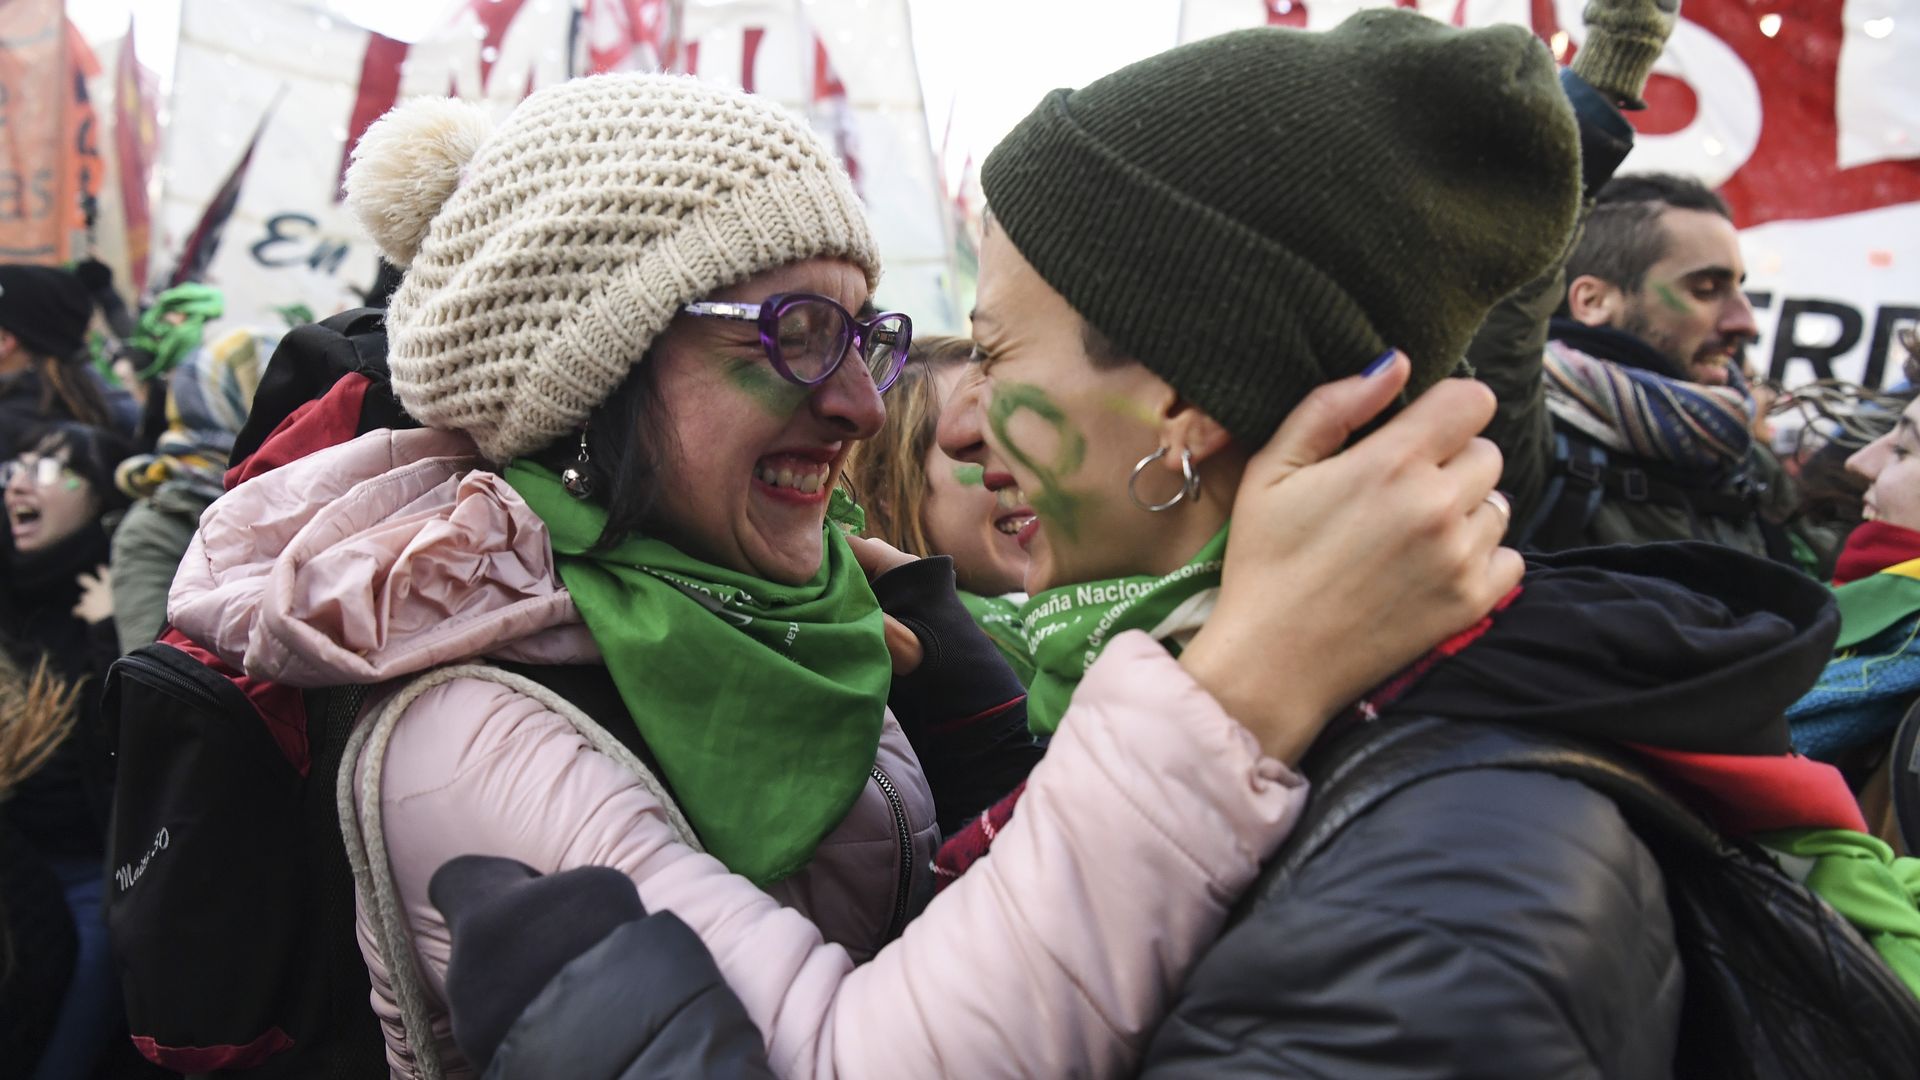 Two women hold each other, celebrating after Argentina lawmakers approve a bill for abortion rights.